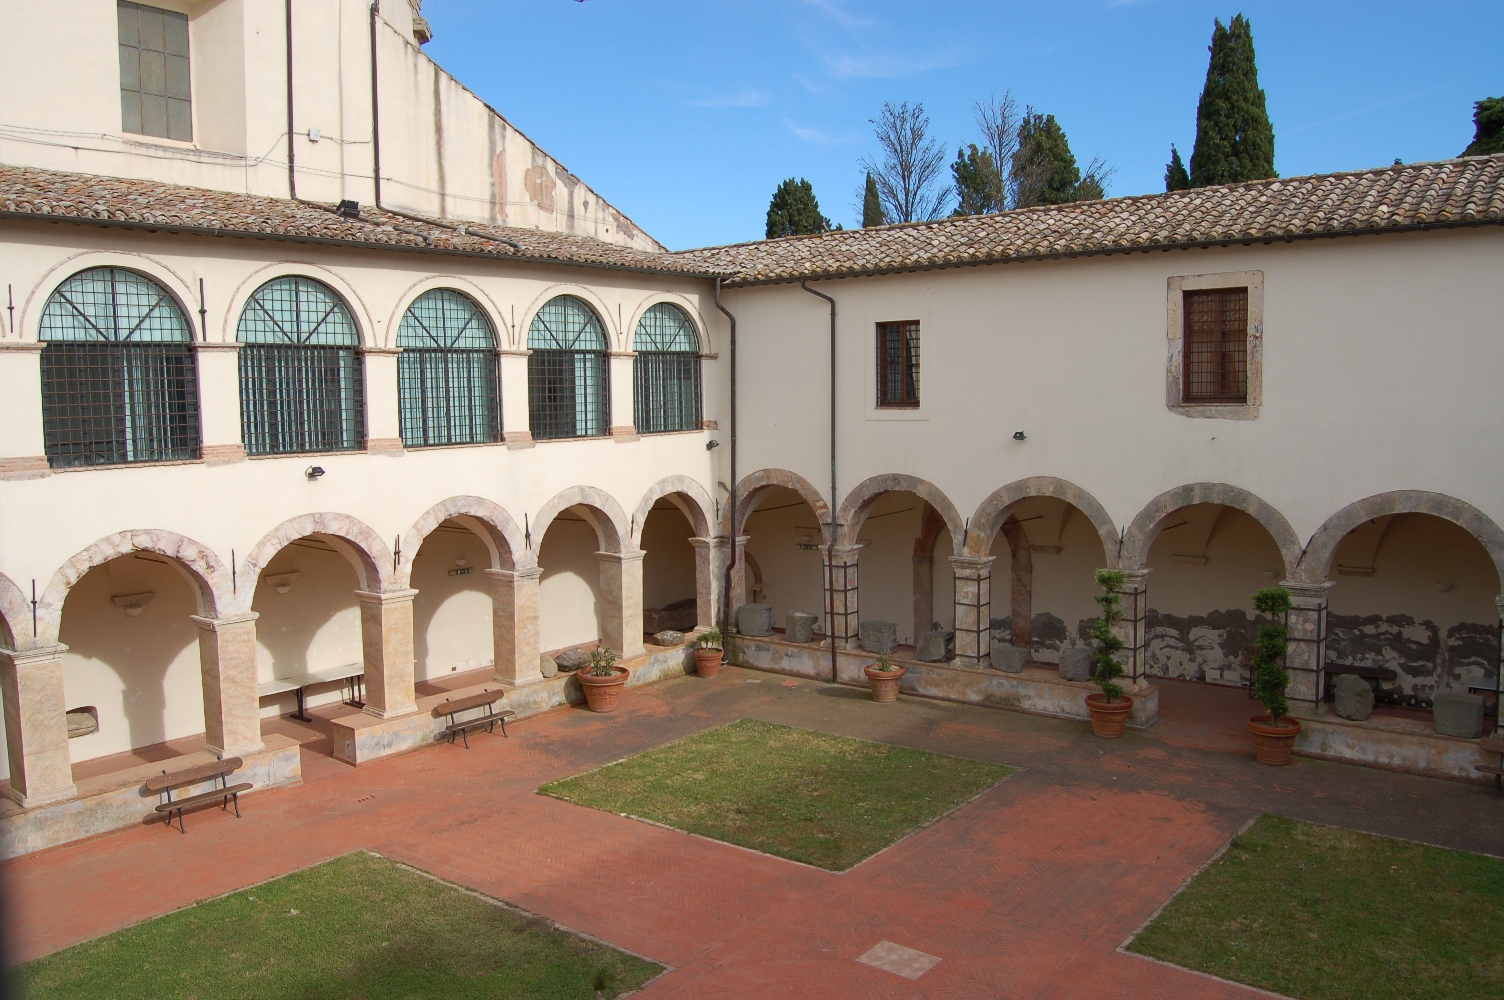 Inside courtyard of the Cultural Pole of Tolfa - Source: www.poloculturale.tolfa.it